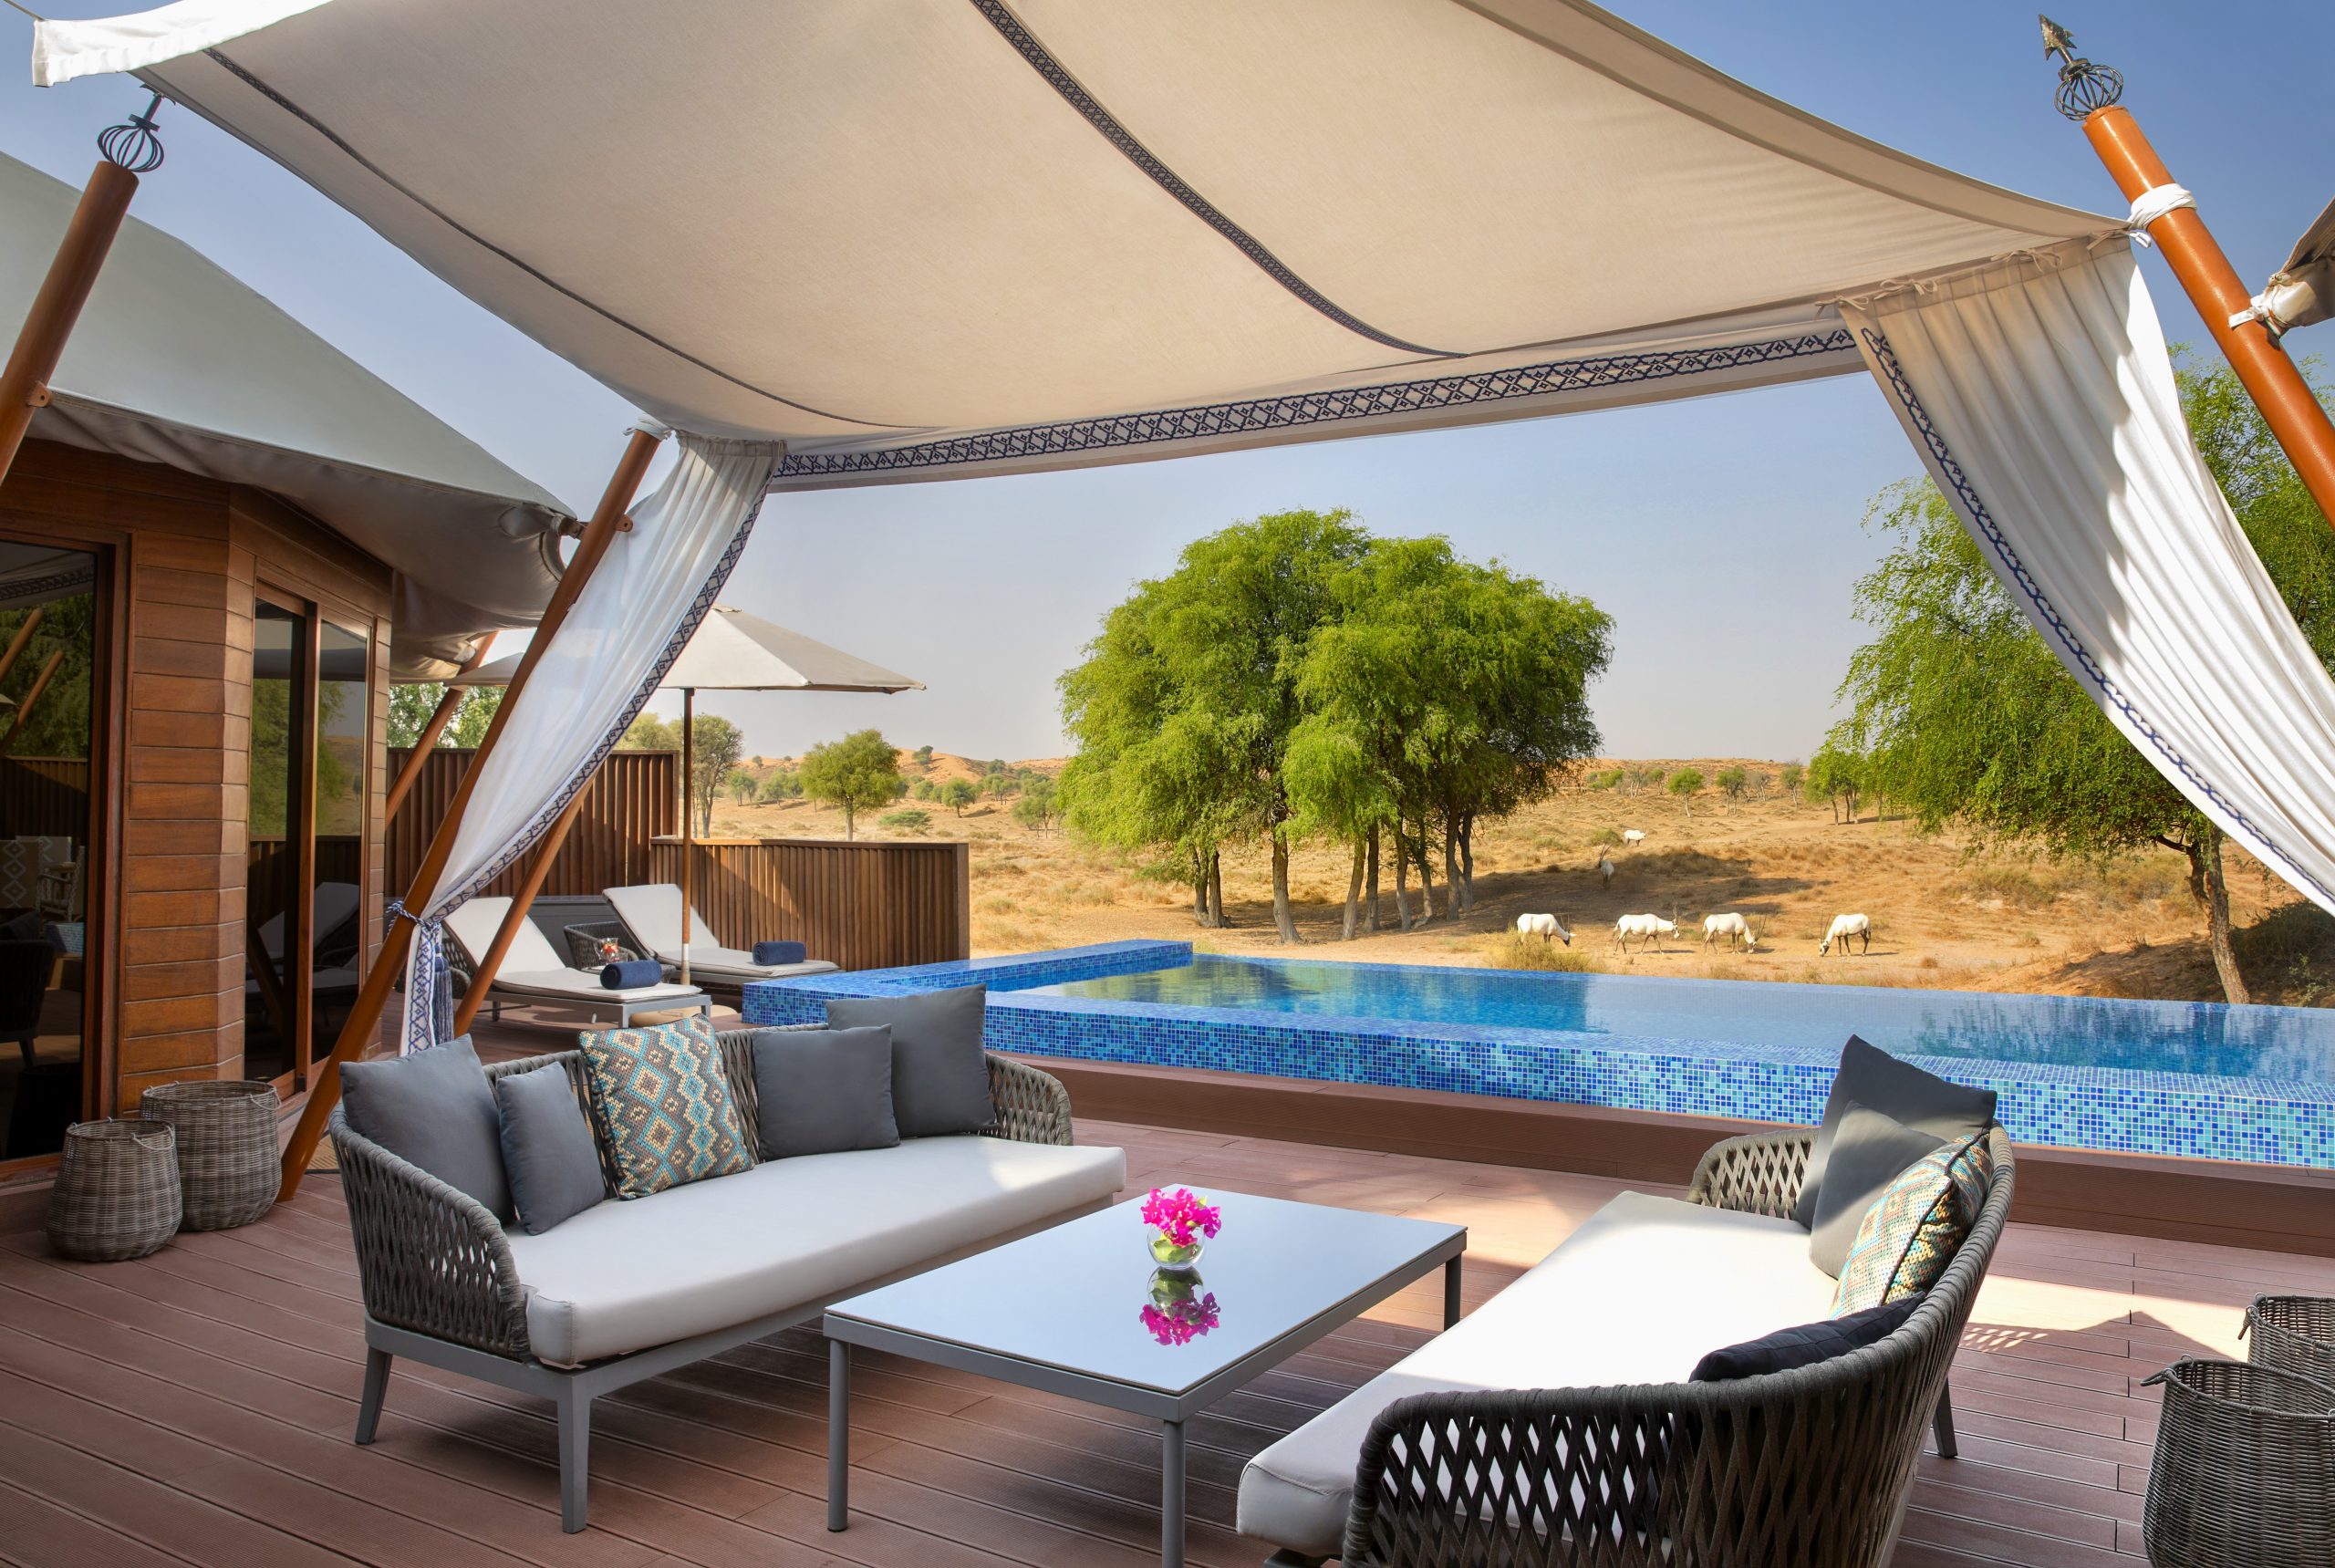 From the porch of the Al Sarab Desert Villa, gazelles can be seen grazing in the hills.